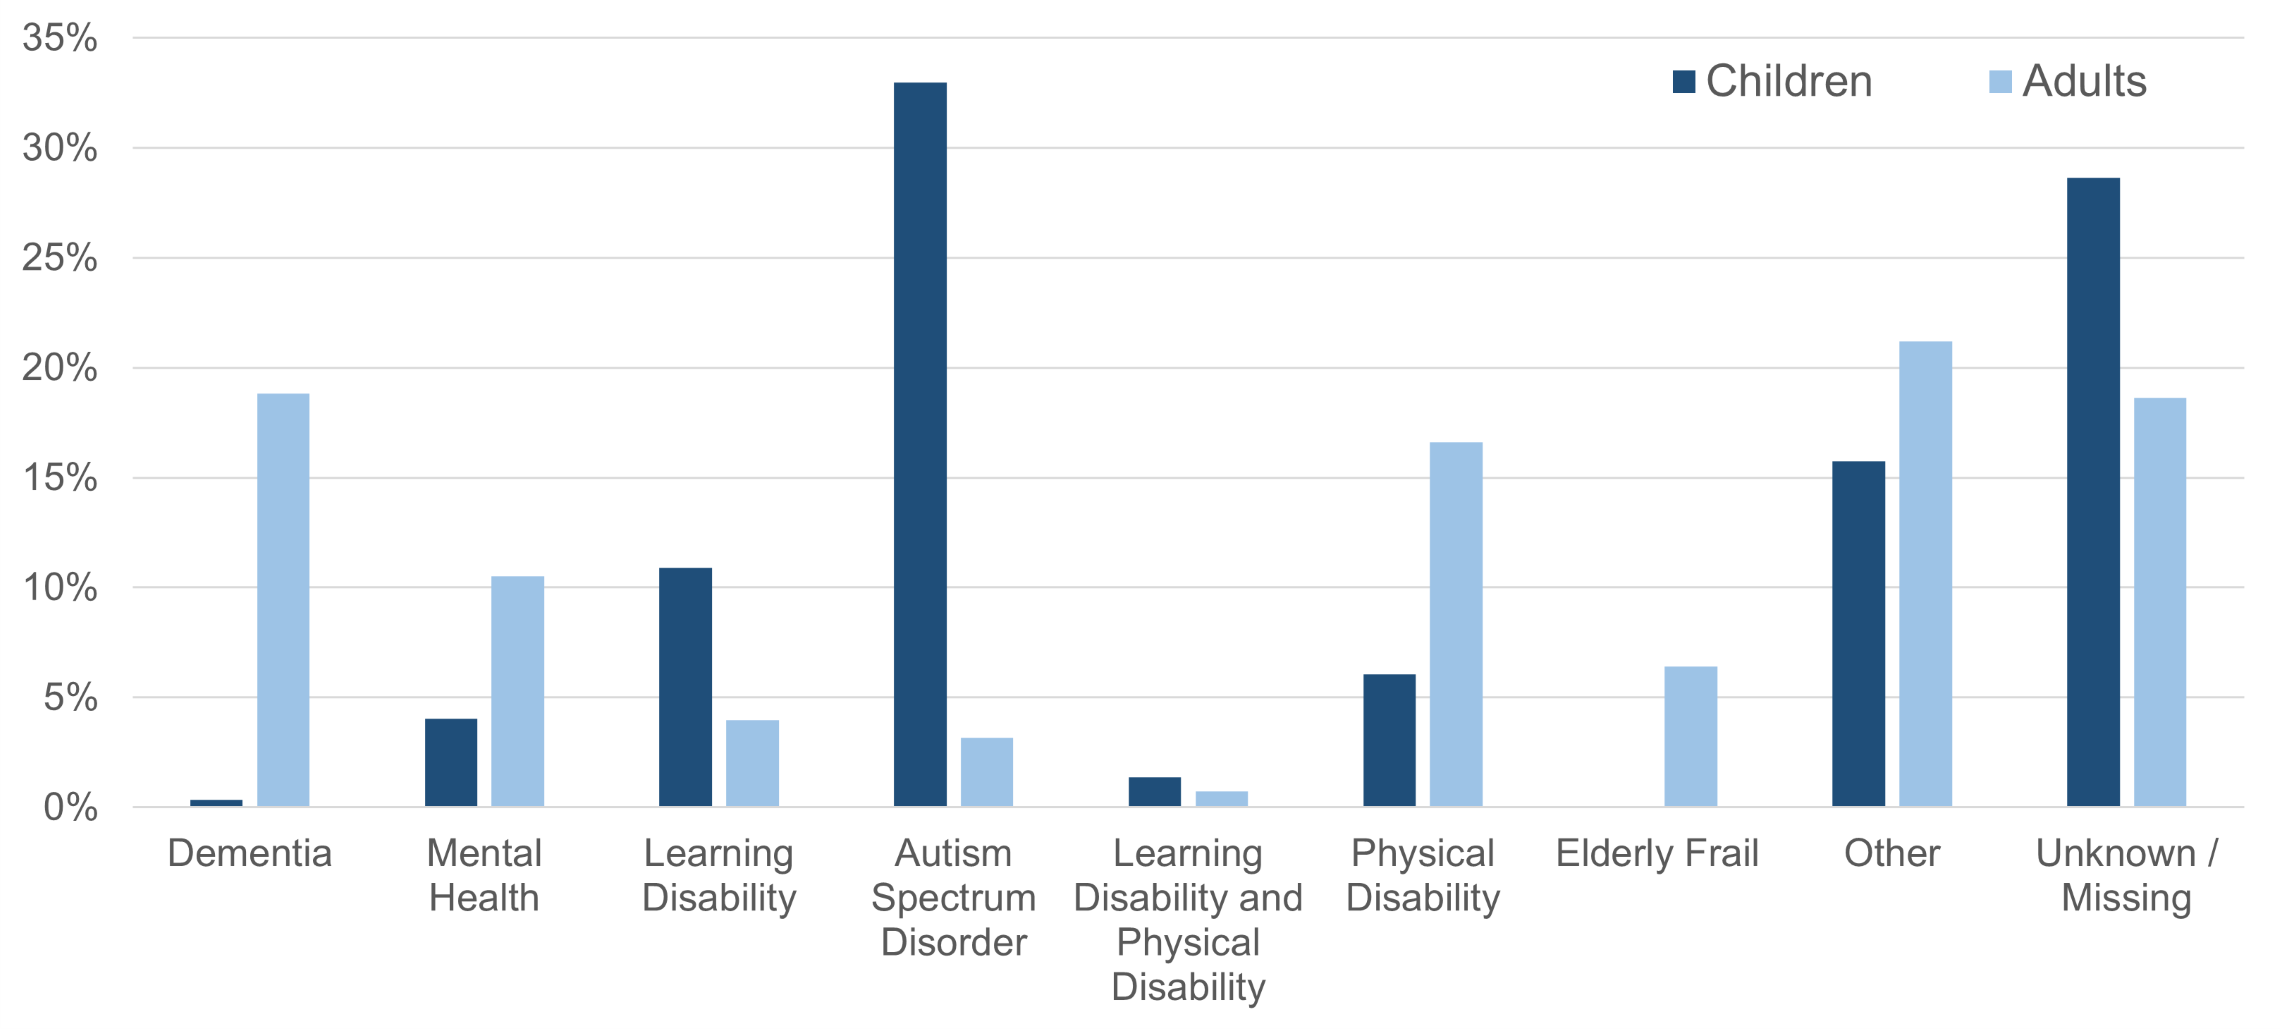 Bar chart showing the main client group of cared for people. A third of children who were being cared for by an unpaid carer were in the Autism Spectrum Disorder client group.